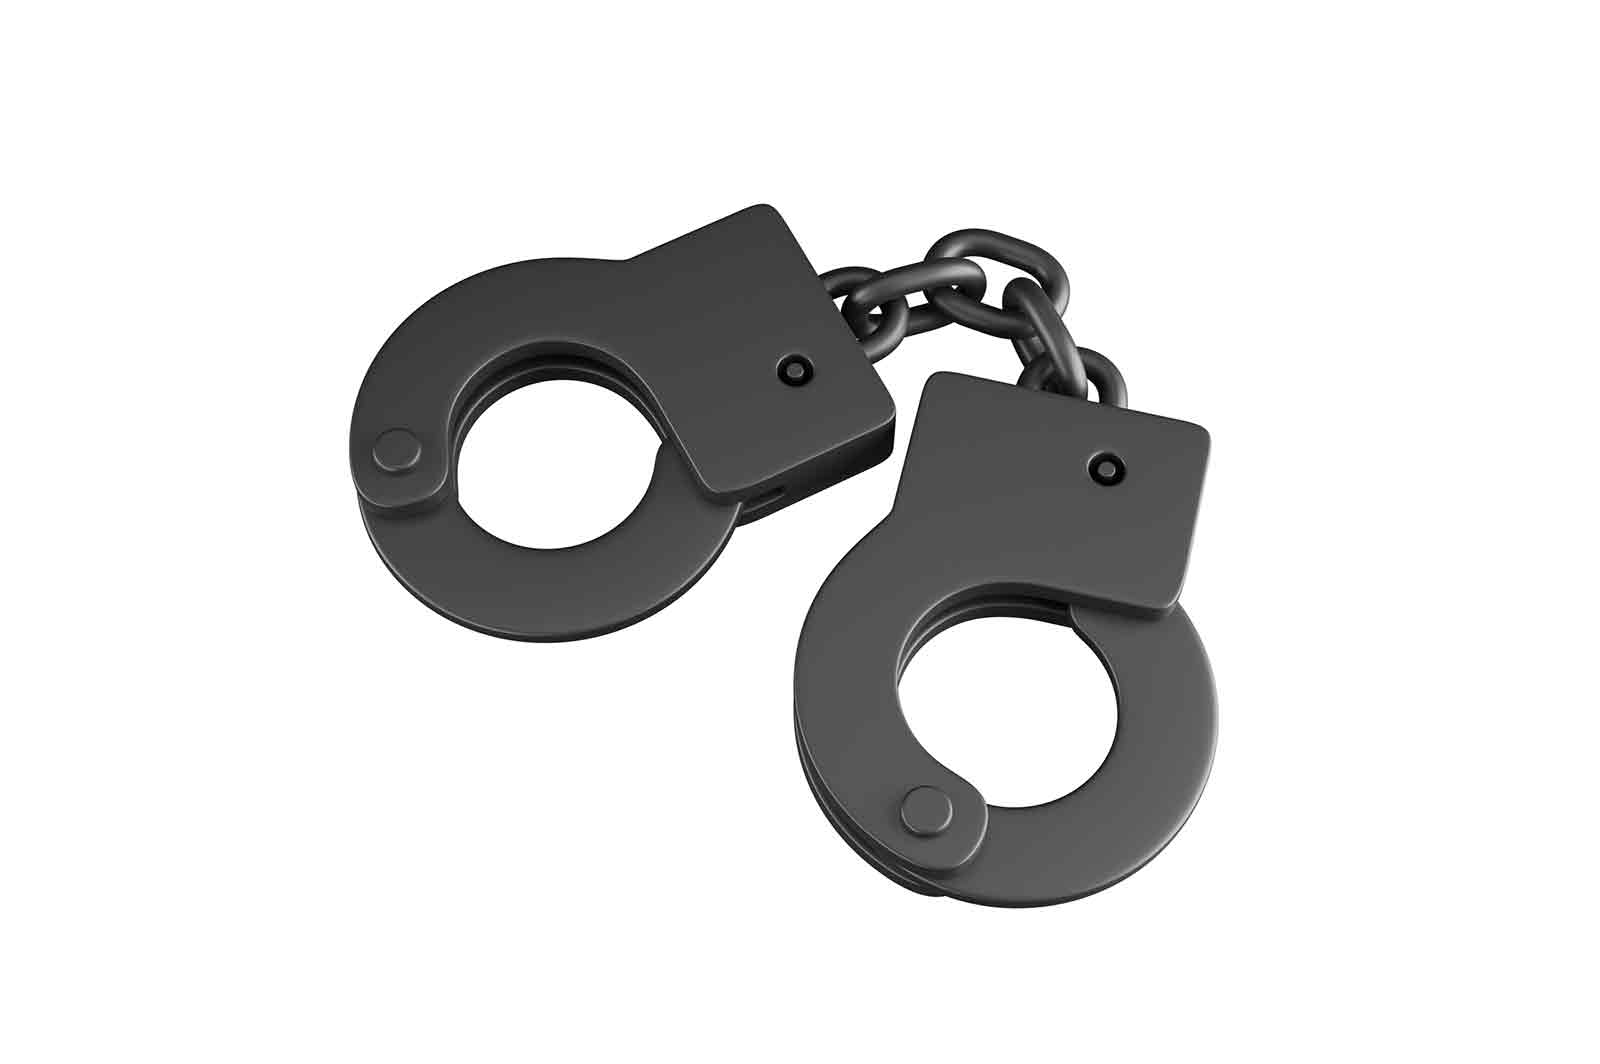 Police handcuffs icon, pair of lockable linked metal rings for securing a prisoners wrists 3d rendered illustration.